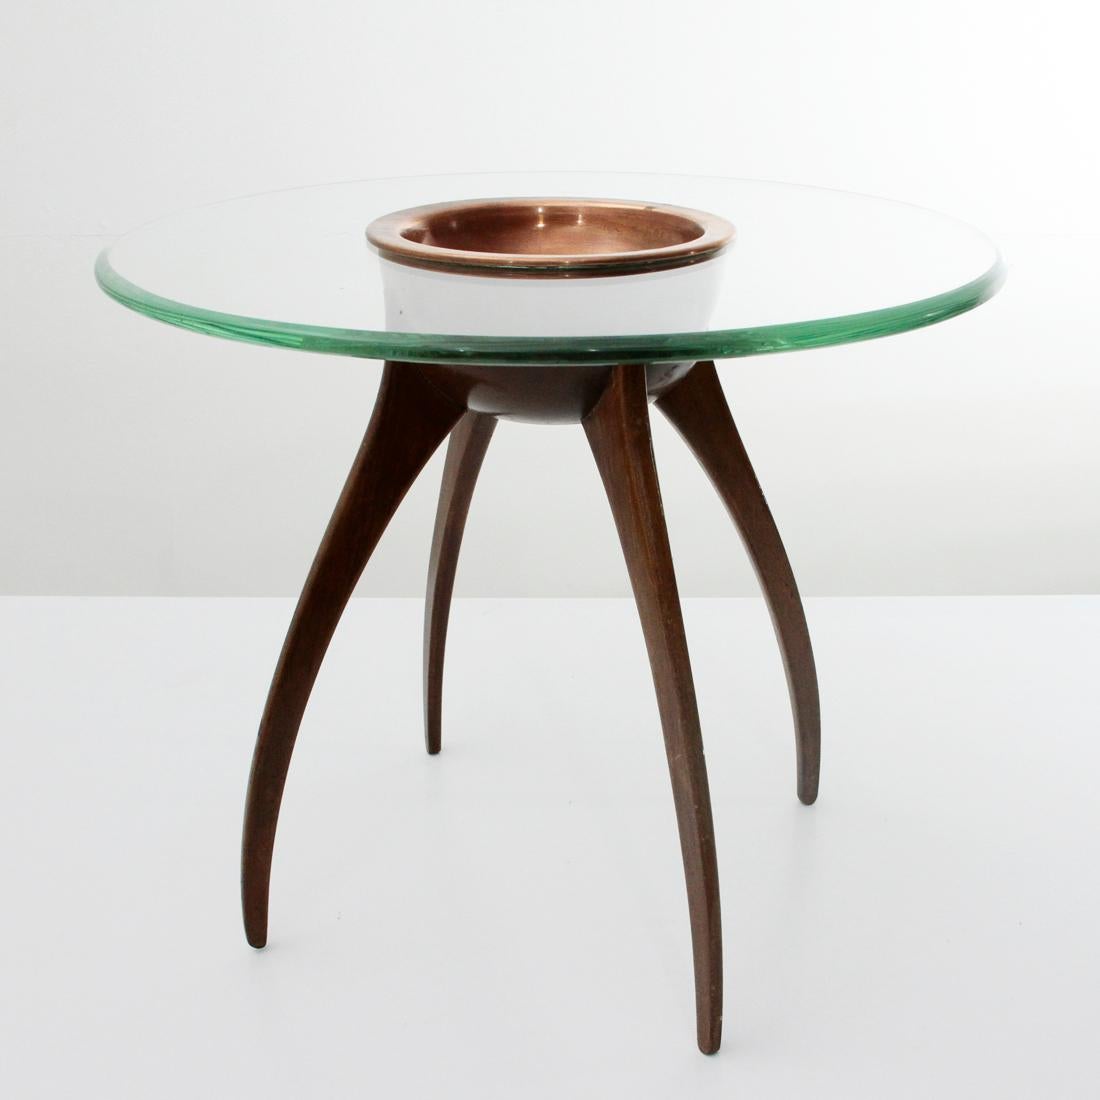 Mid-20th Century Italian Midcentury Coffee Table with Copper Cup, 1940s